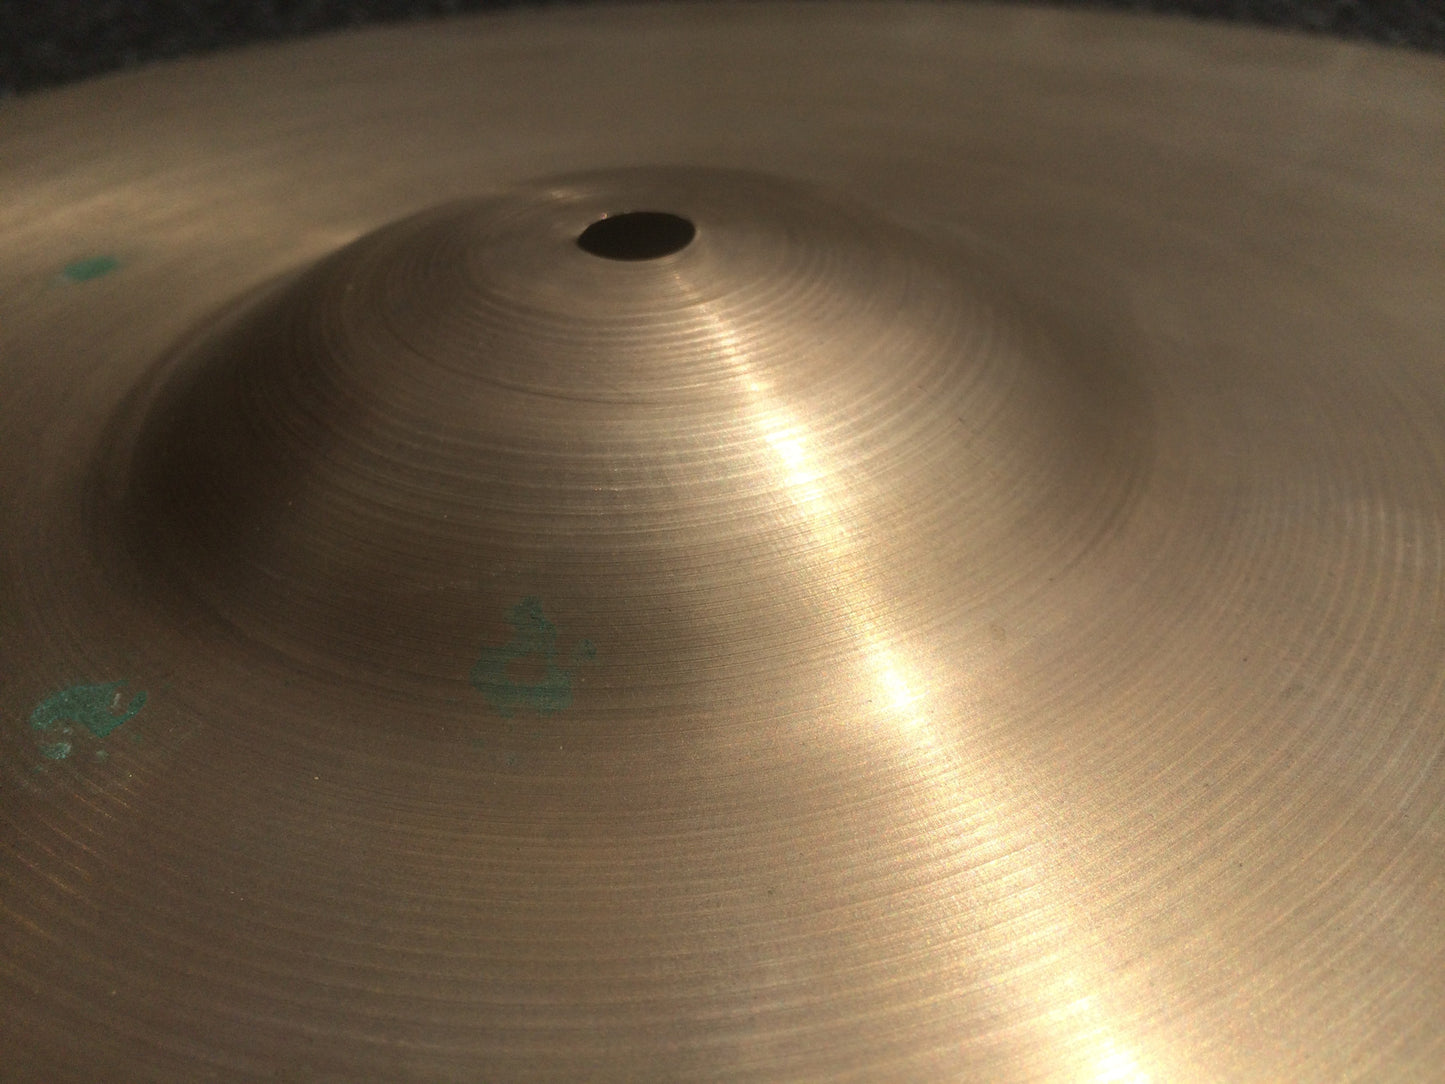 18" Vintage Early-Mid 1940's Zildjian A Crash-Ride Cymbal 1468g - Inventory # 161